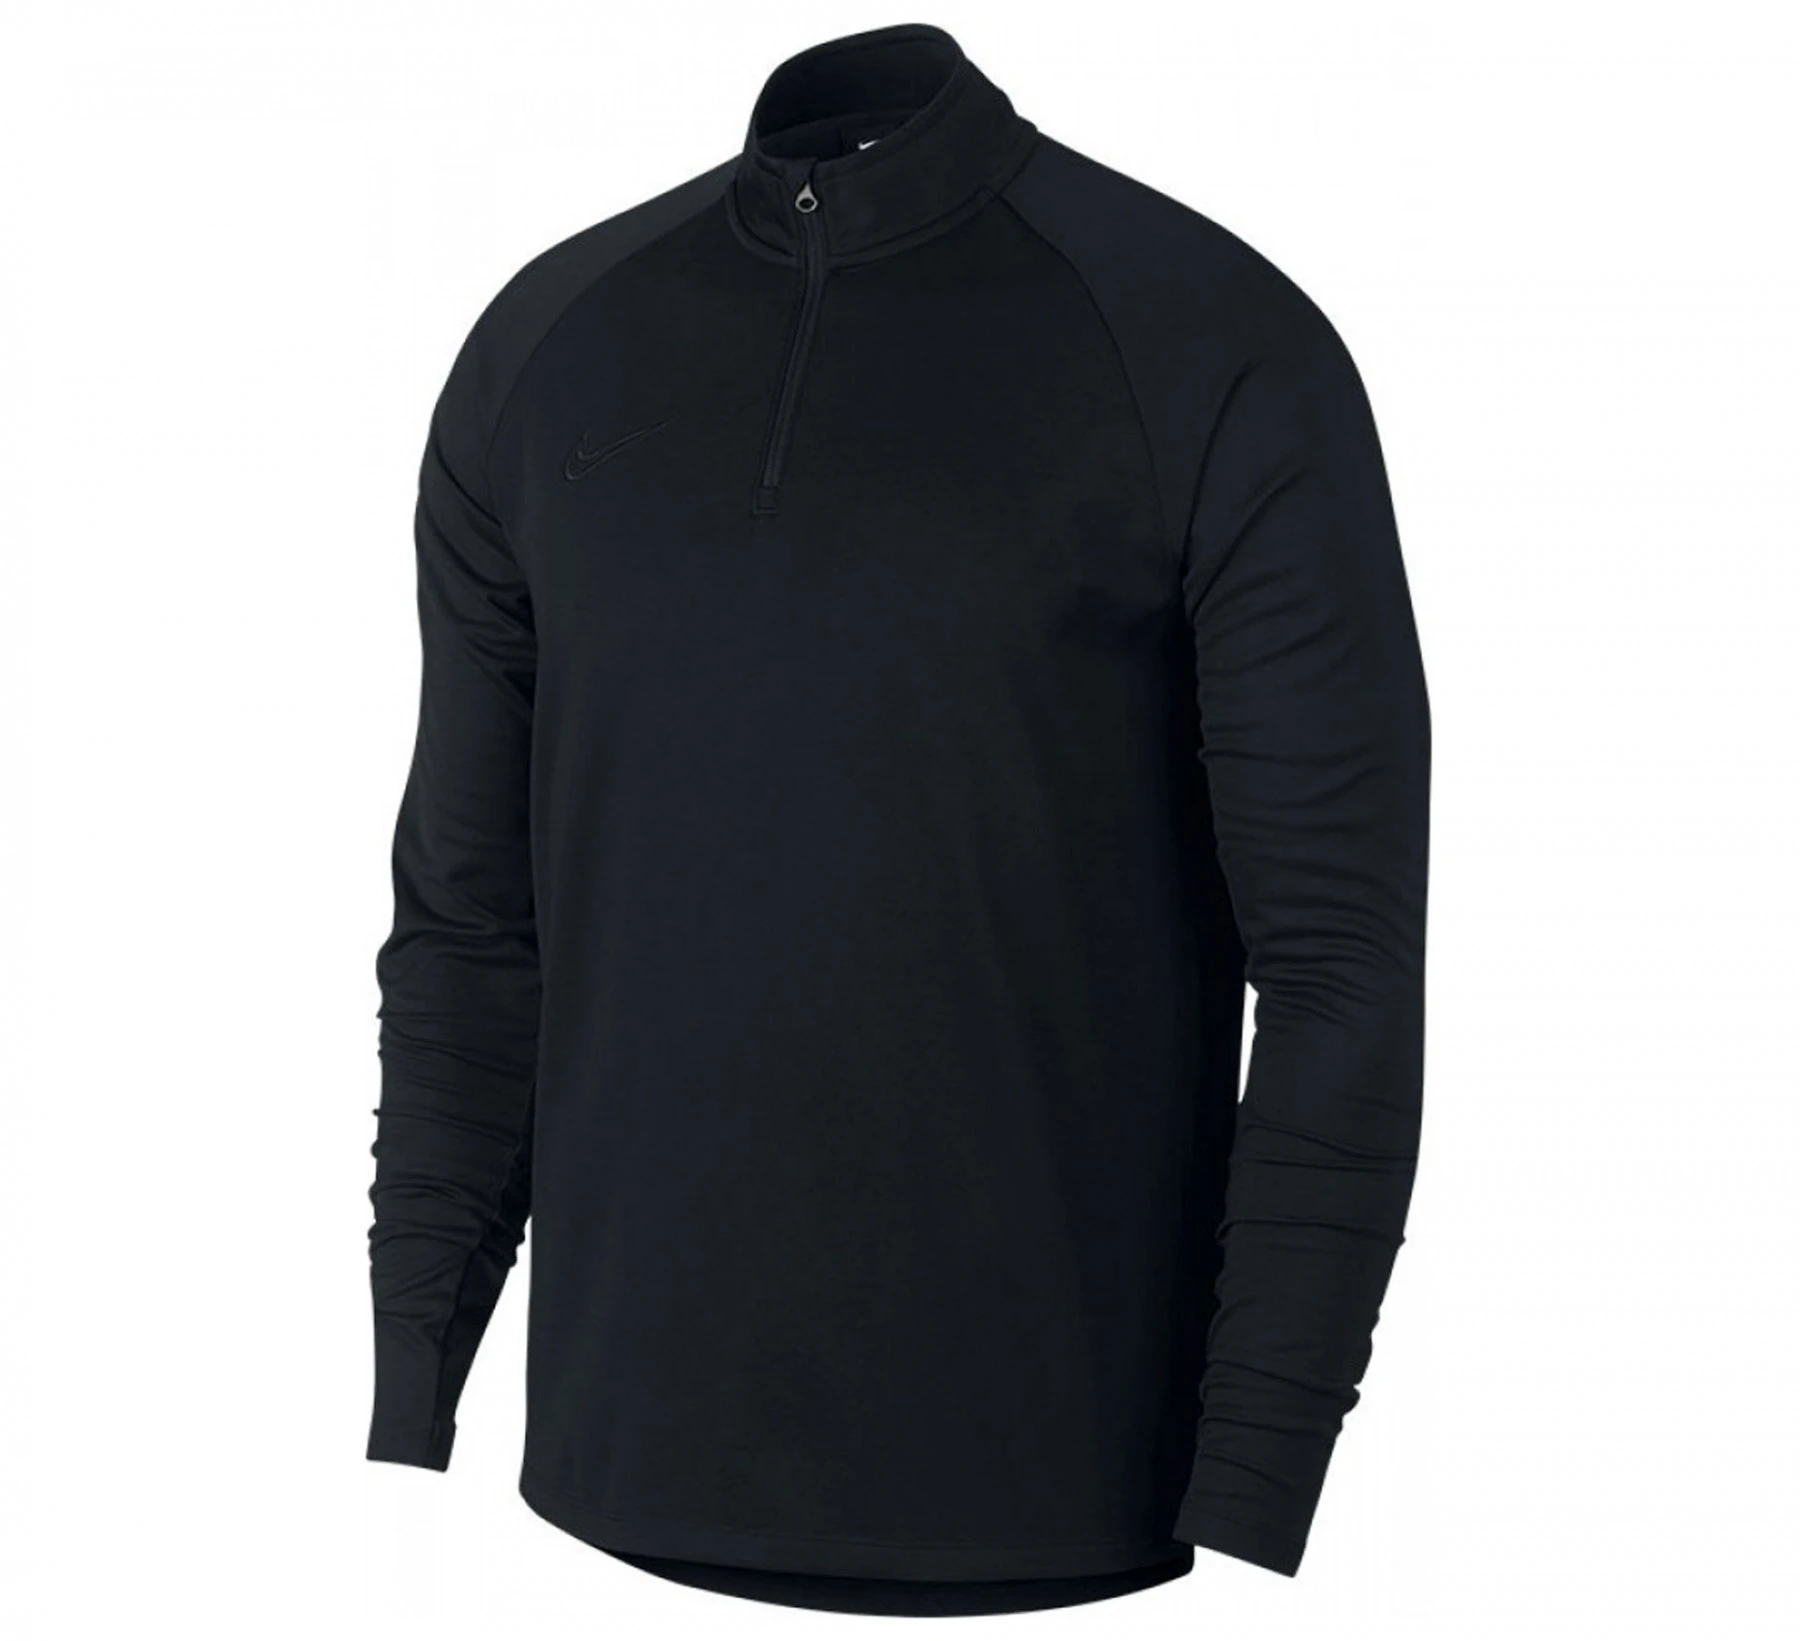 Nike Dry Academy Dril Top voetbal sweater